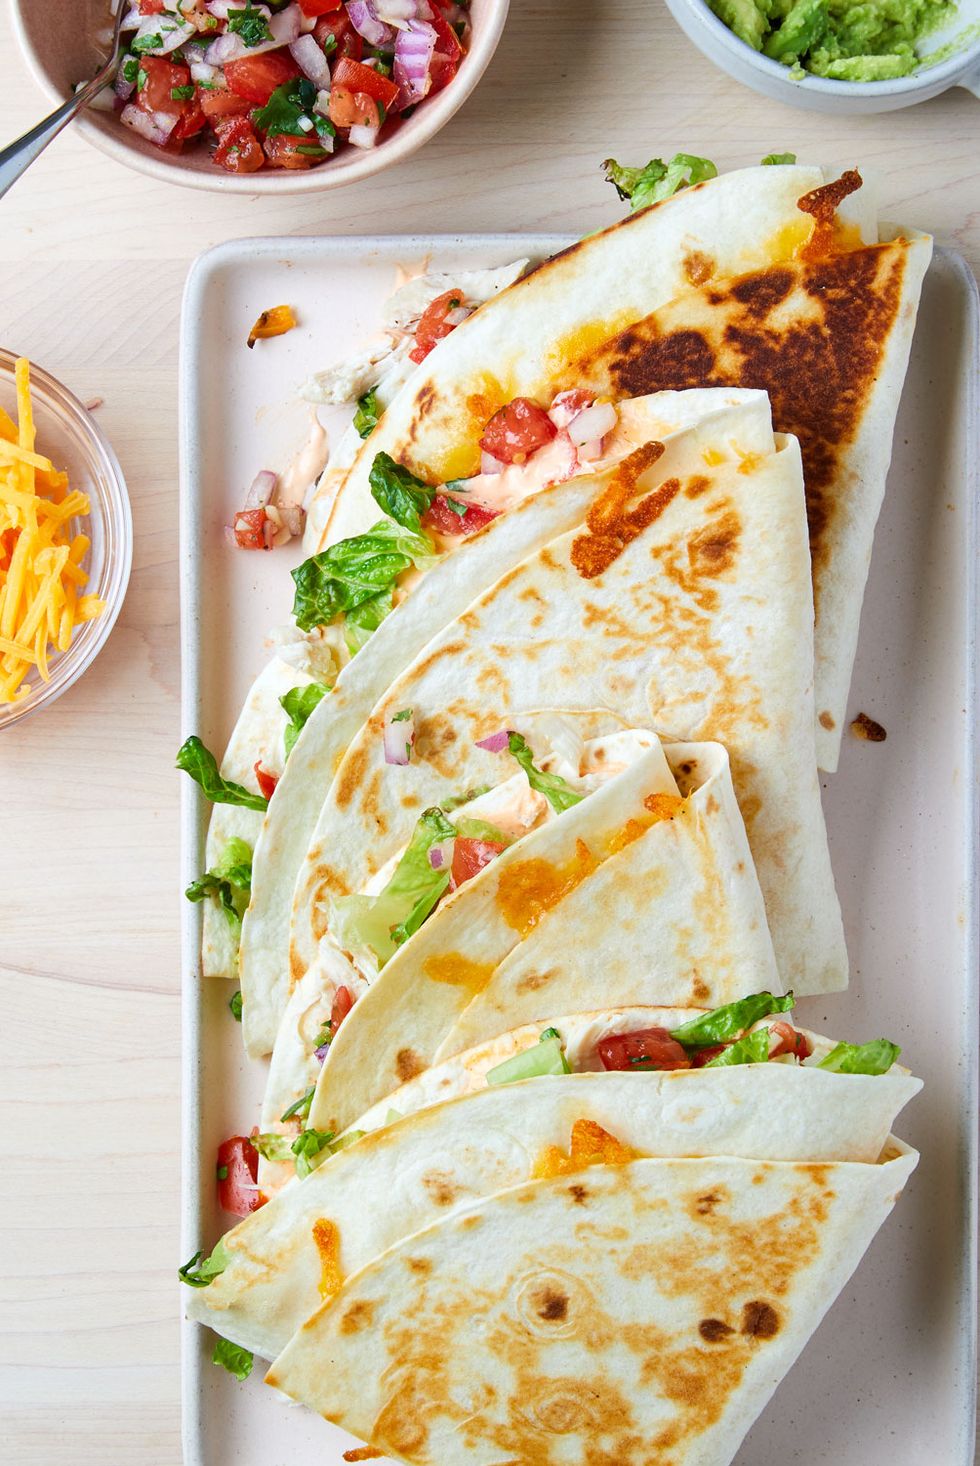 30 Easy-to-Assemble Wrap Recipes — Tasty Wraps to Pack for Lunch